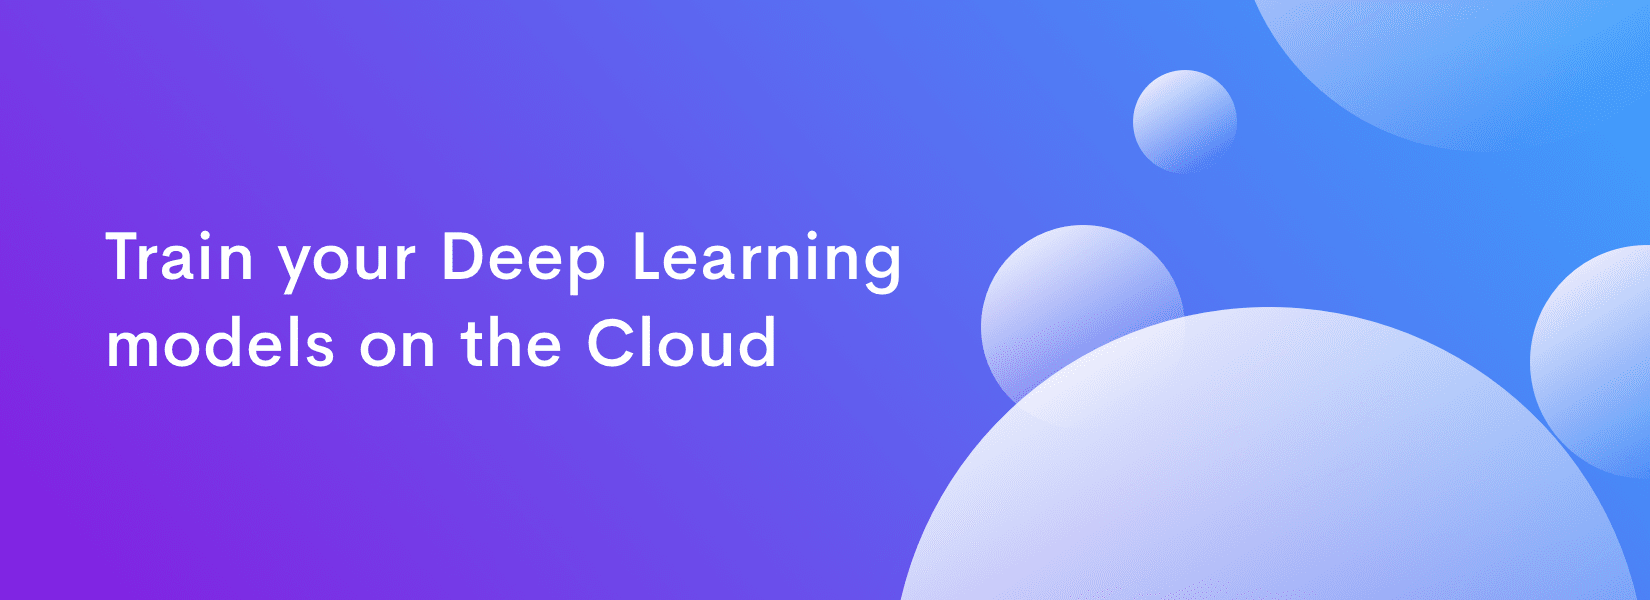 Train your Deep Learning models on the Cloud